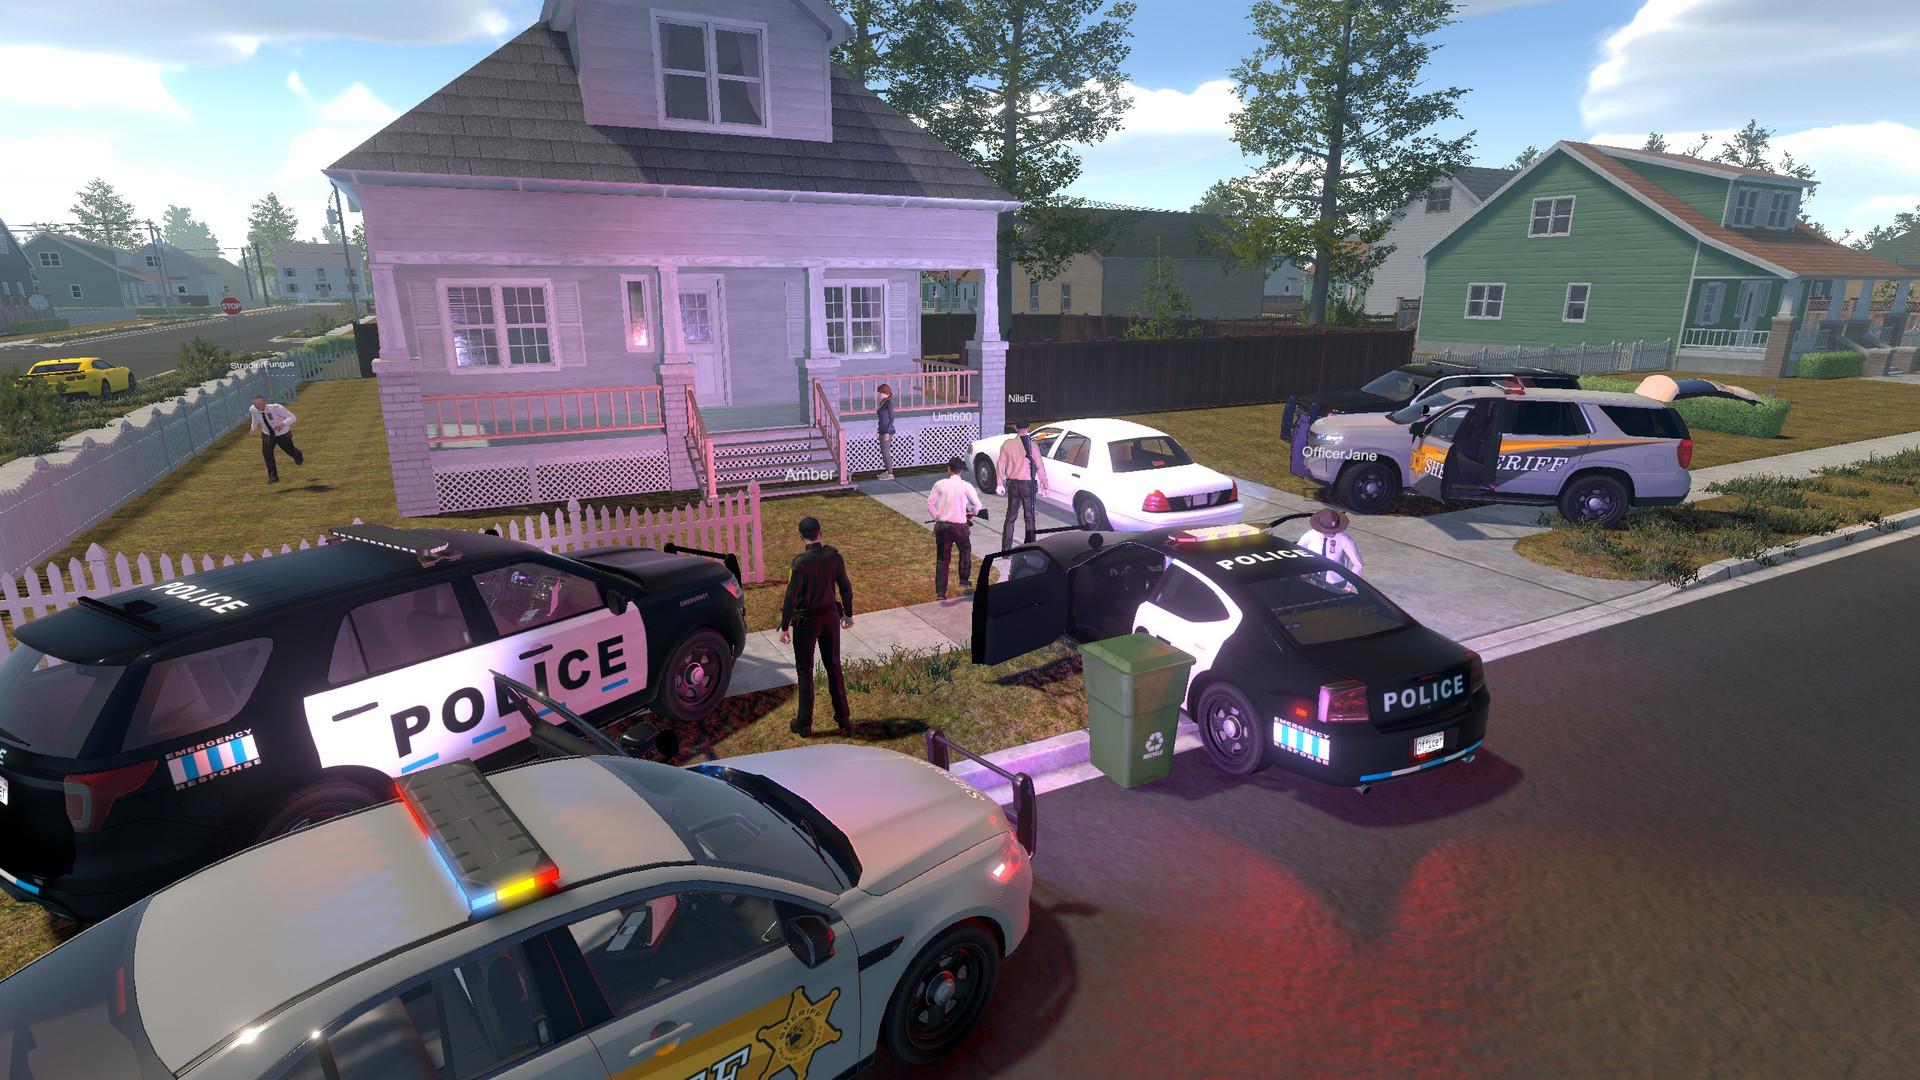 Download Flashing Lights Police Firefighting Emergency Services Simulator para pc via torrent